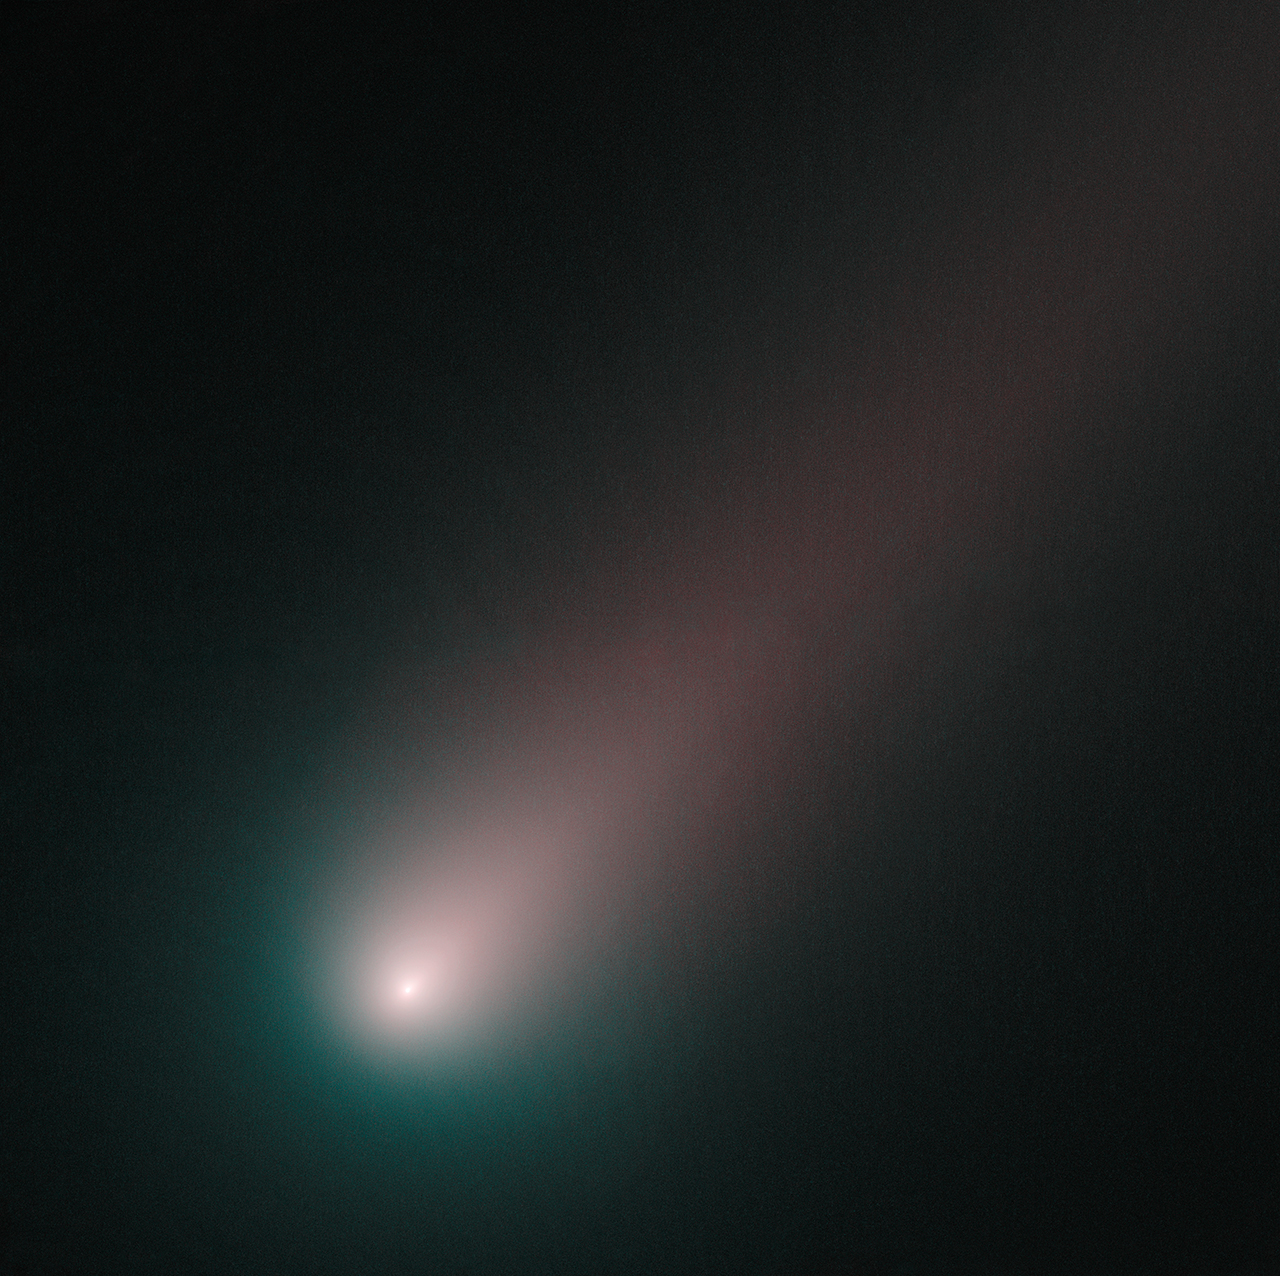 This image was made from observations on 2 November 2013, and combines pictures of comet ISON taken through blue and red filters.